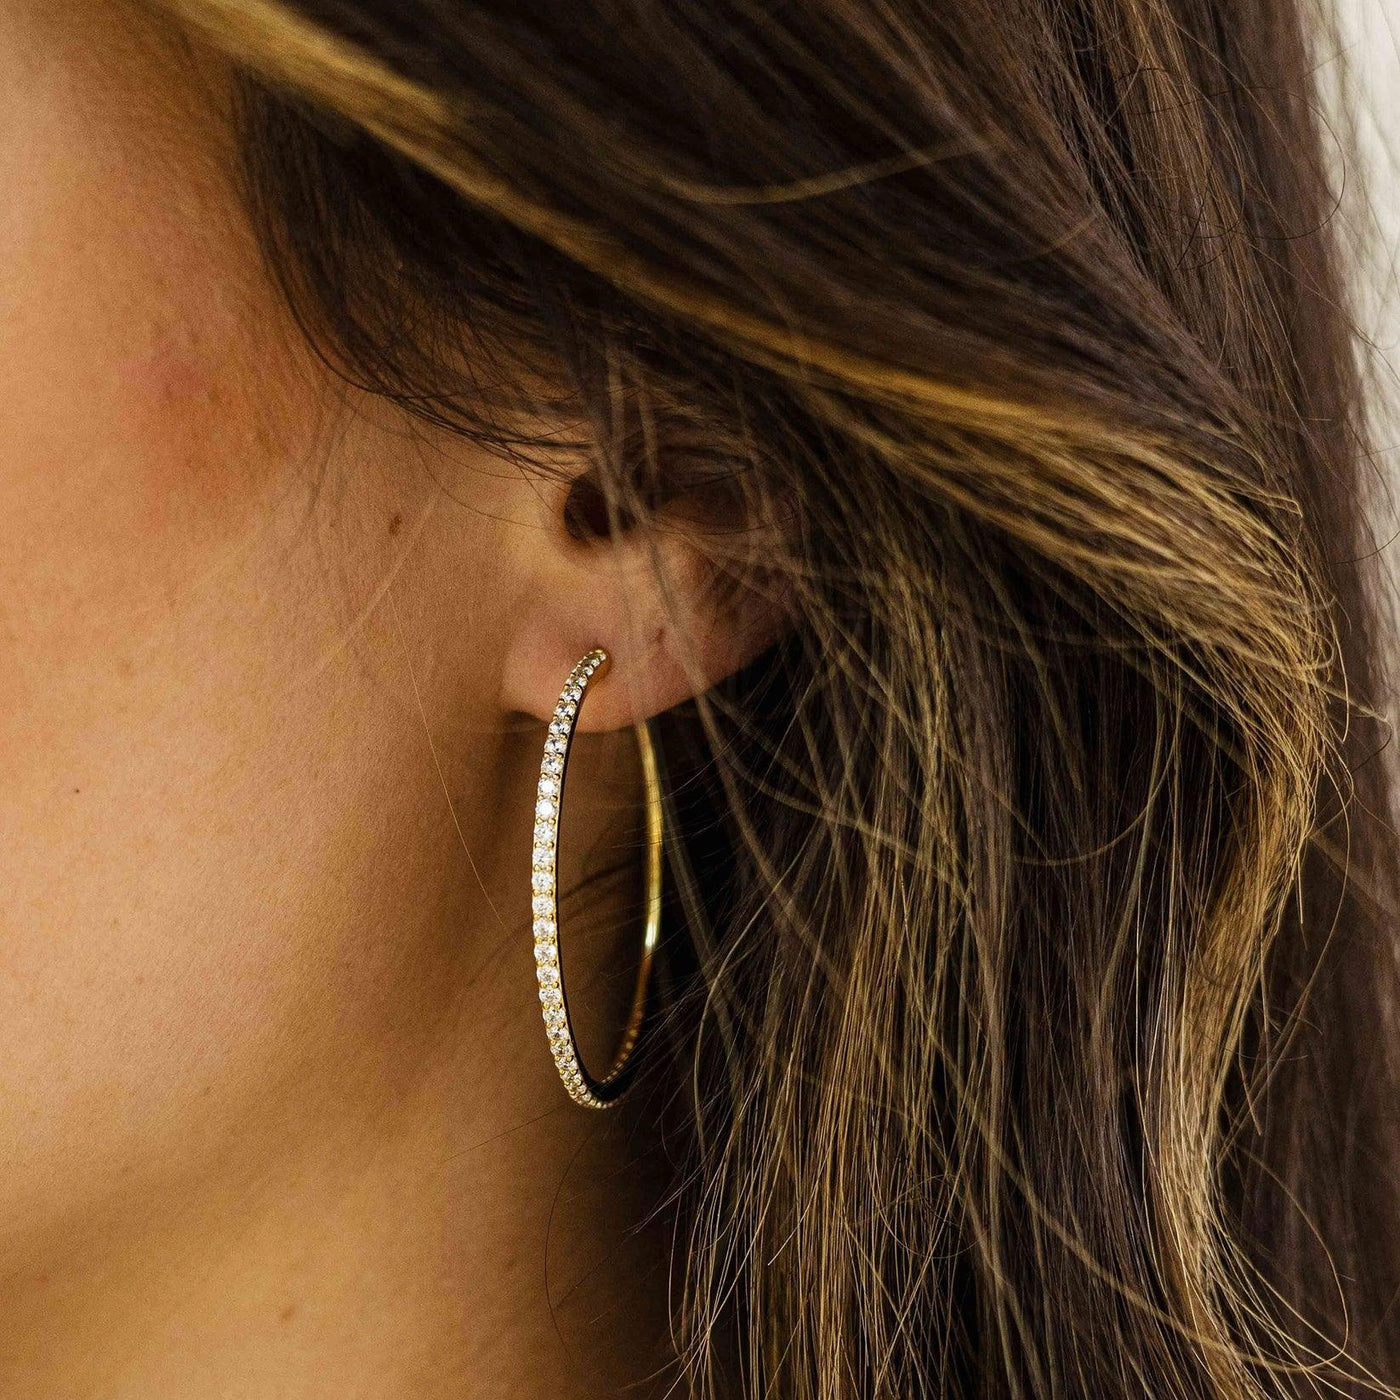 40mm Extra Maxi Gold Sparkling Hoop Earrings - Rococo Jewellery